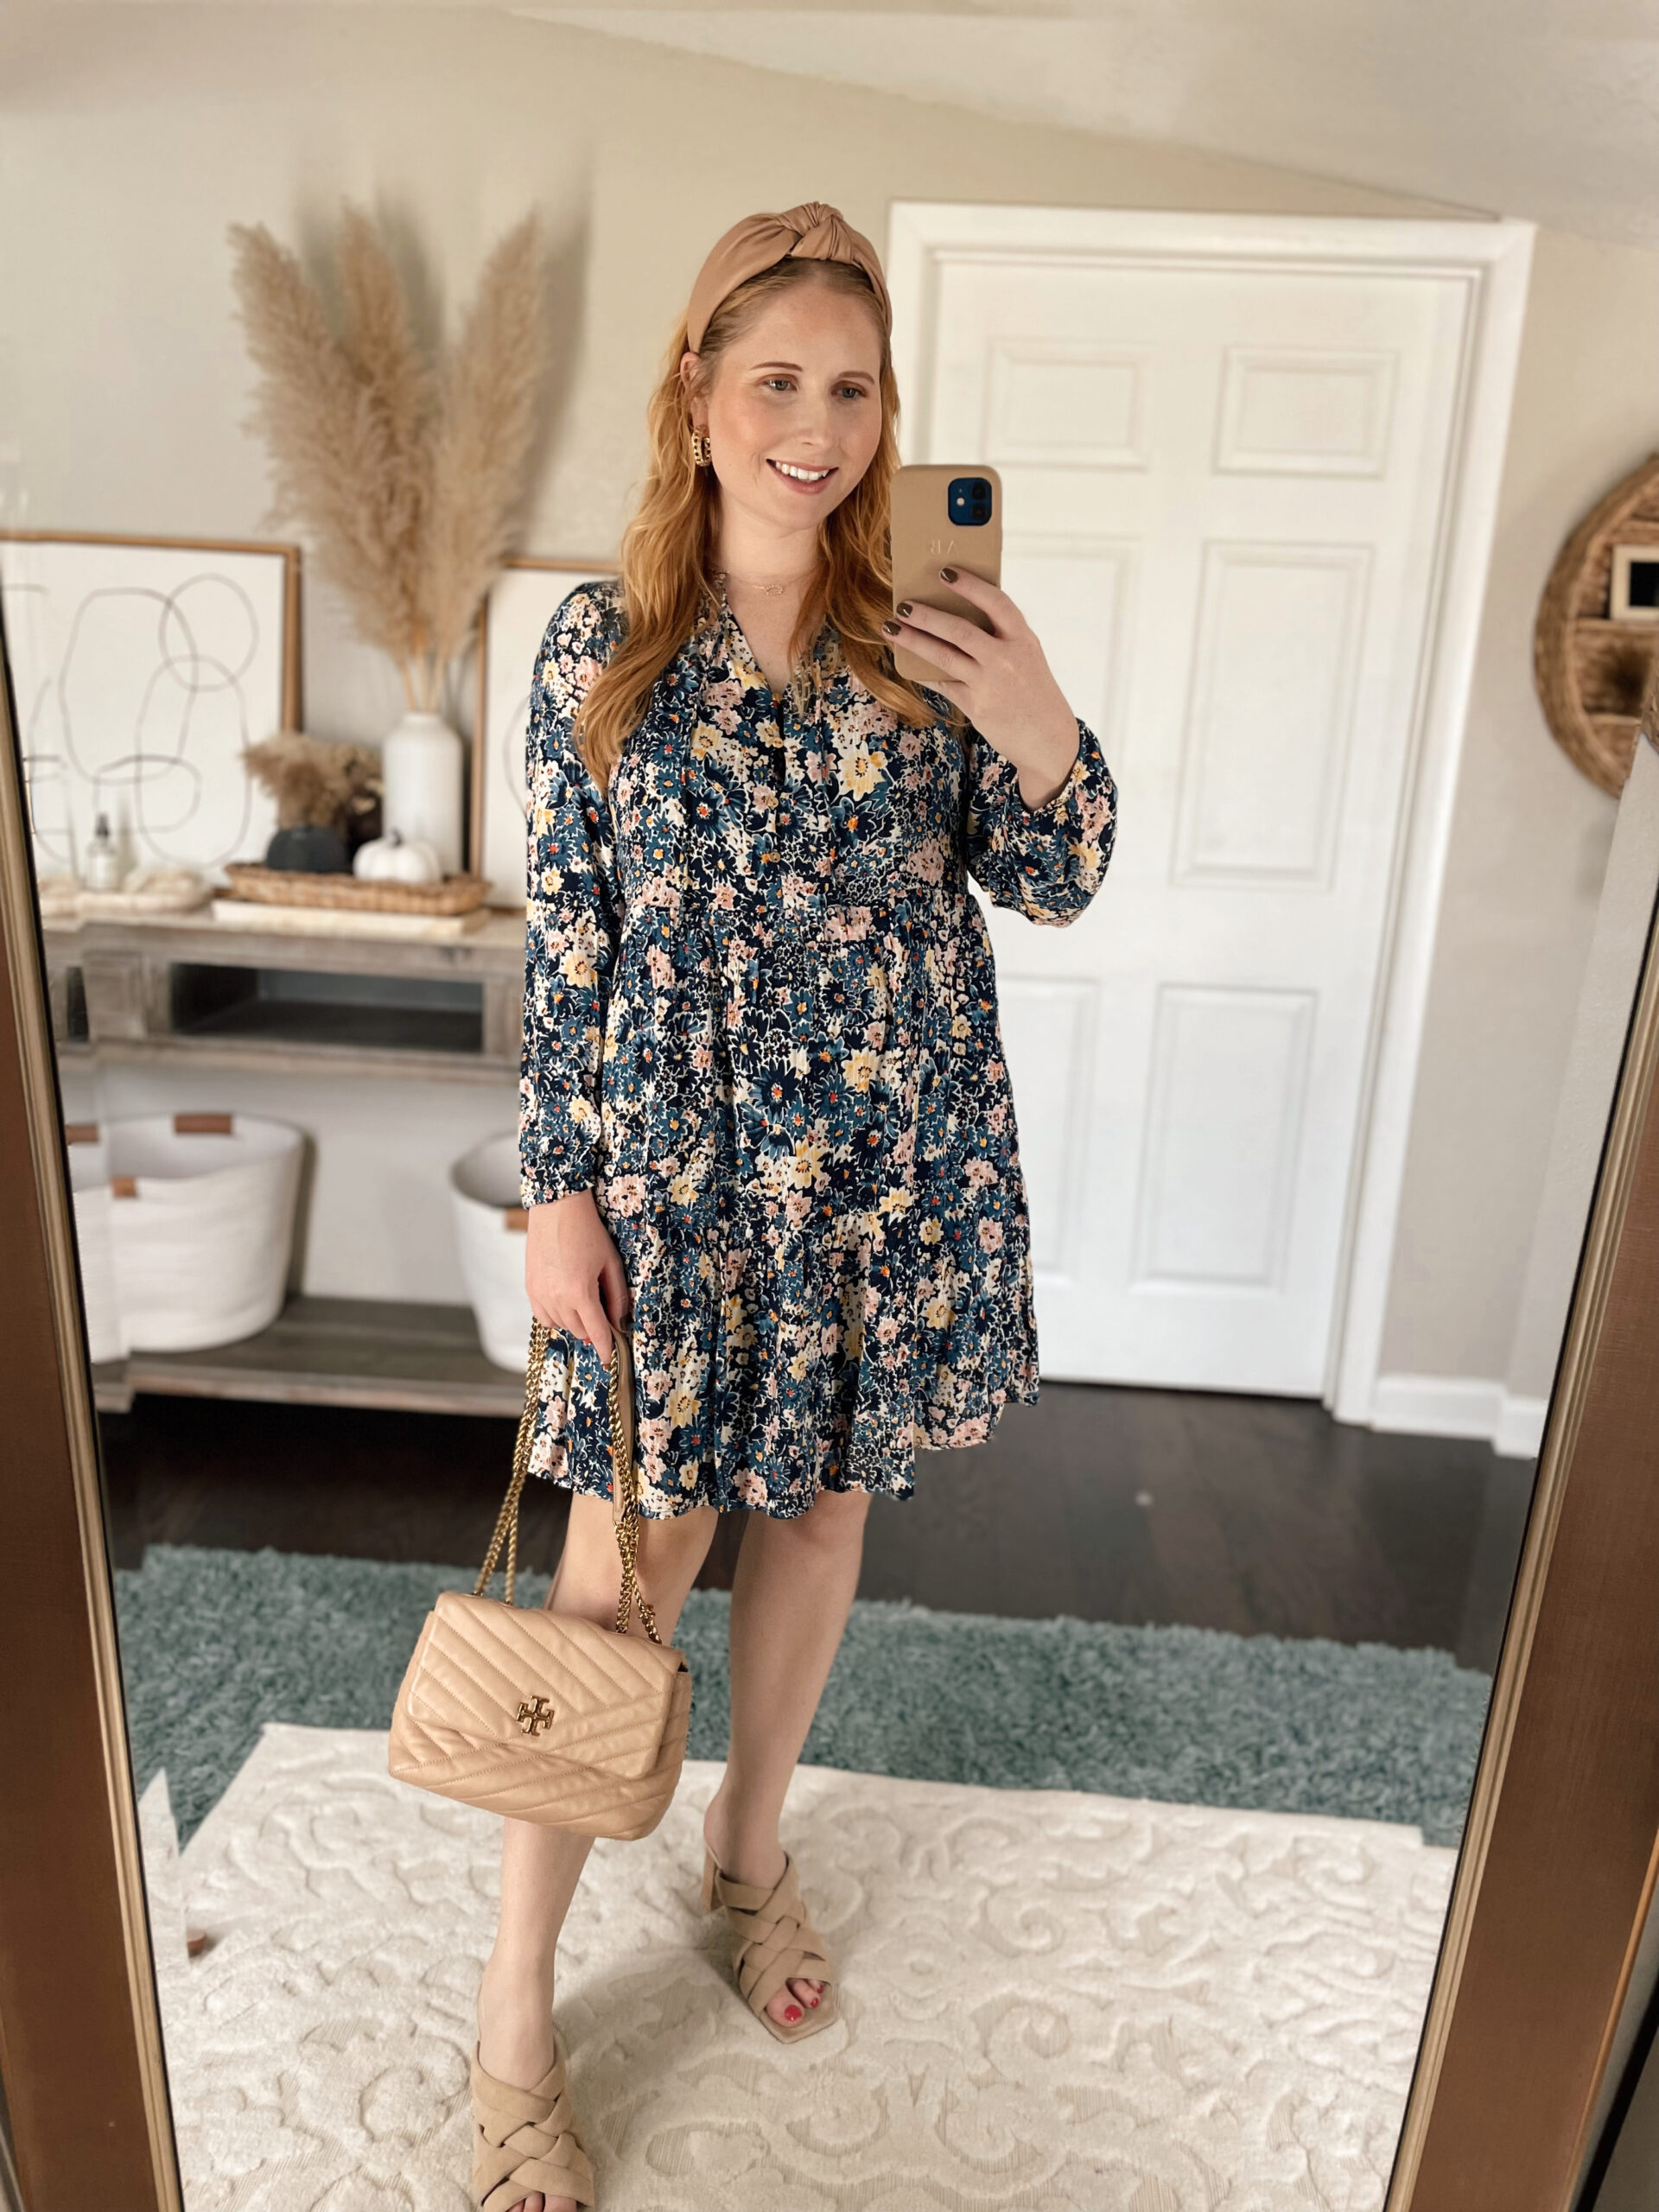 LOFT Fall Dress - 10 Cute Fall Outfits: What to Wear This Fall 2022